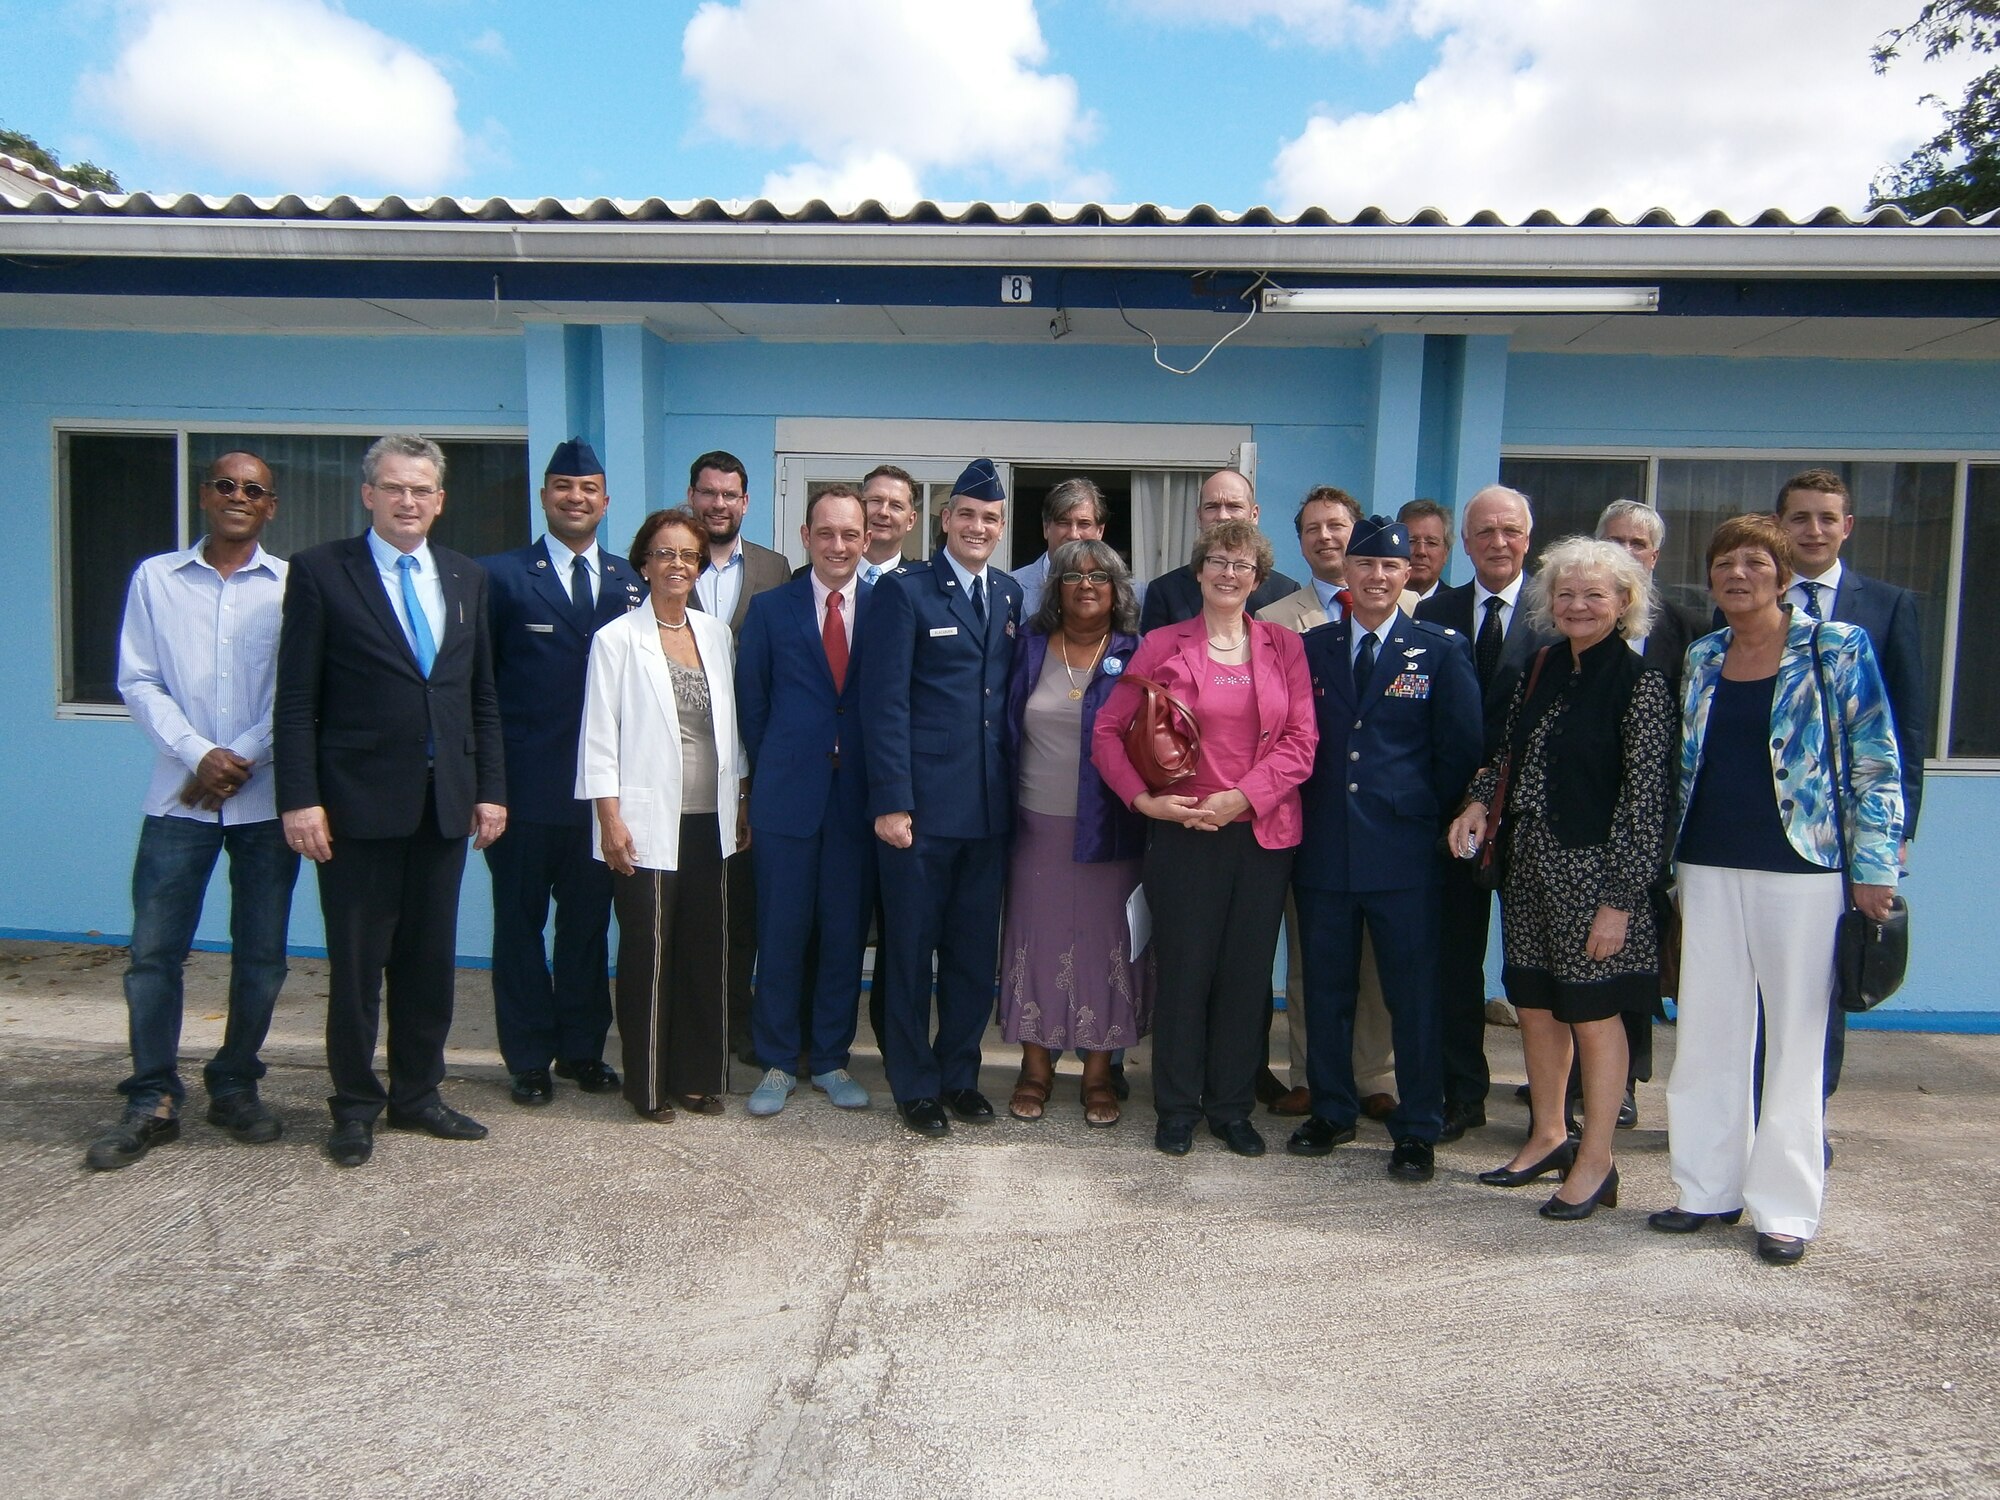 Members of the Dutch parliament, the U.S. Forward Operating Location and the U.S. Consulate General pose for a group photo in front of the Fundashon Sentro di Dama or SEDA building during a USFOL community relations program immersion visit, Jan. 5, 2015. The USFOL and the U.S. Consulate General hosted a delegation of 12 Dutch parliament members for the engagement, which included a visit to SEDA, a non-profit organization focused on supporting women, children and teens in crisis. The visit focused on the 14 year history of community projects completed by members of the USFOL and their longtime partner organization SEDA, highlighting project diversity ranging from painting facilities to donating school supplies. (Courtesy Photo)